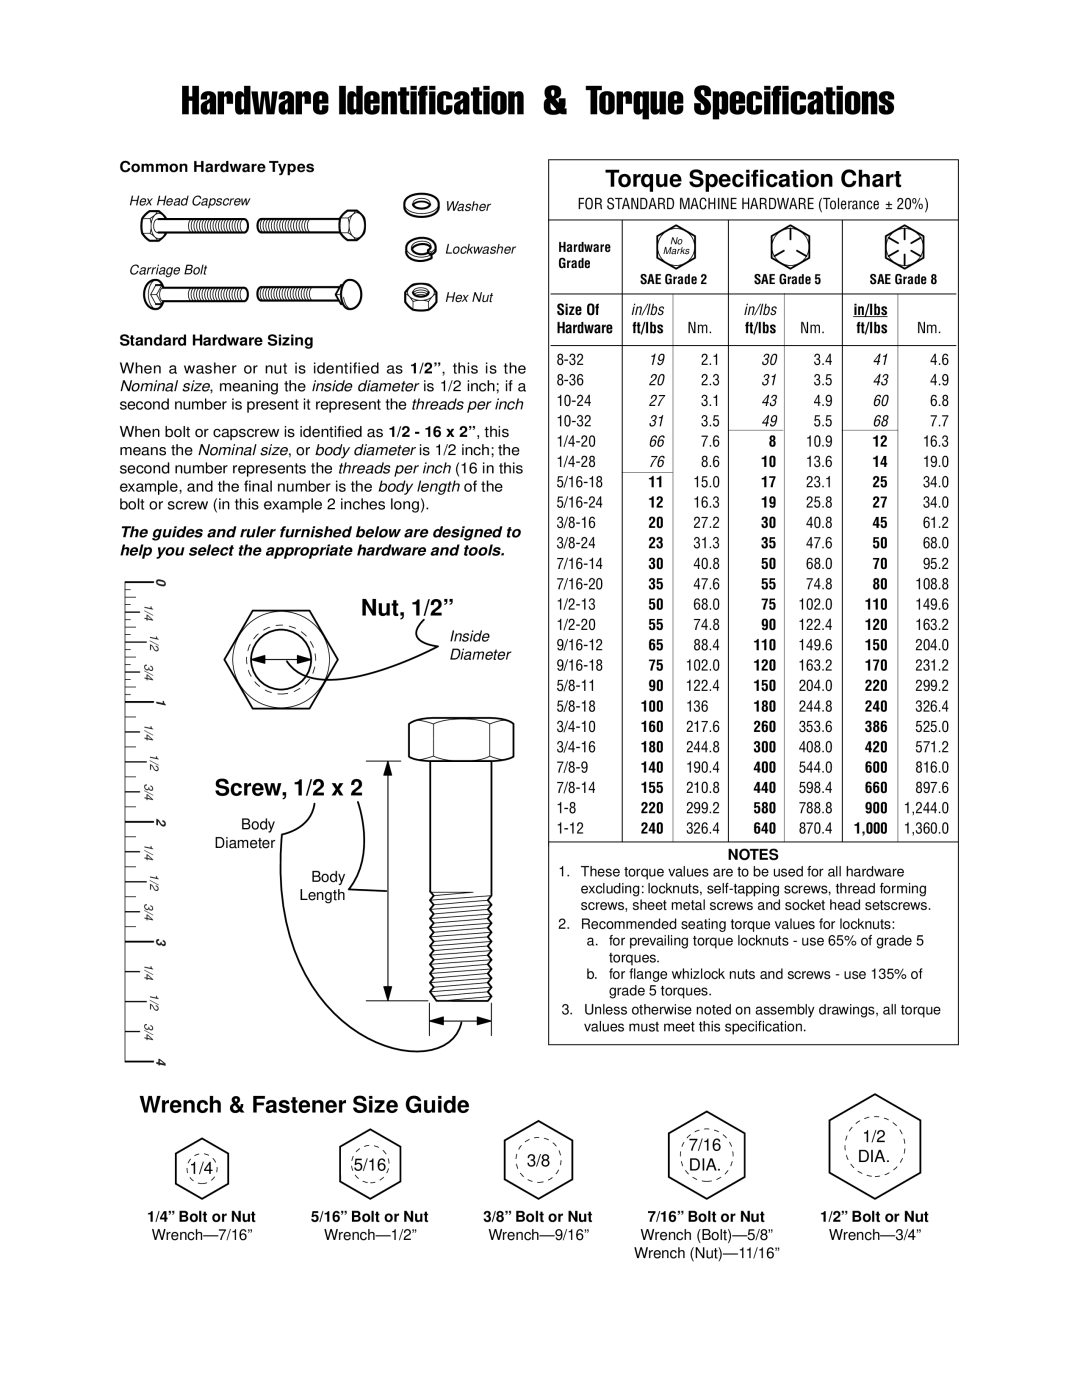 Simplicity Series Transaxle Torque Specification Chart, Wrench & Fastener Size Guide, Nut, 1/2”, Screw, 1/2, 7/16, 5/16 